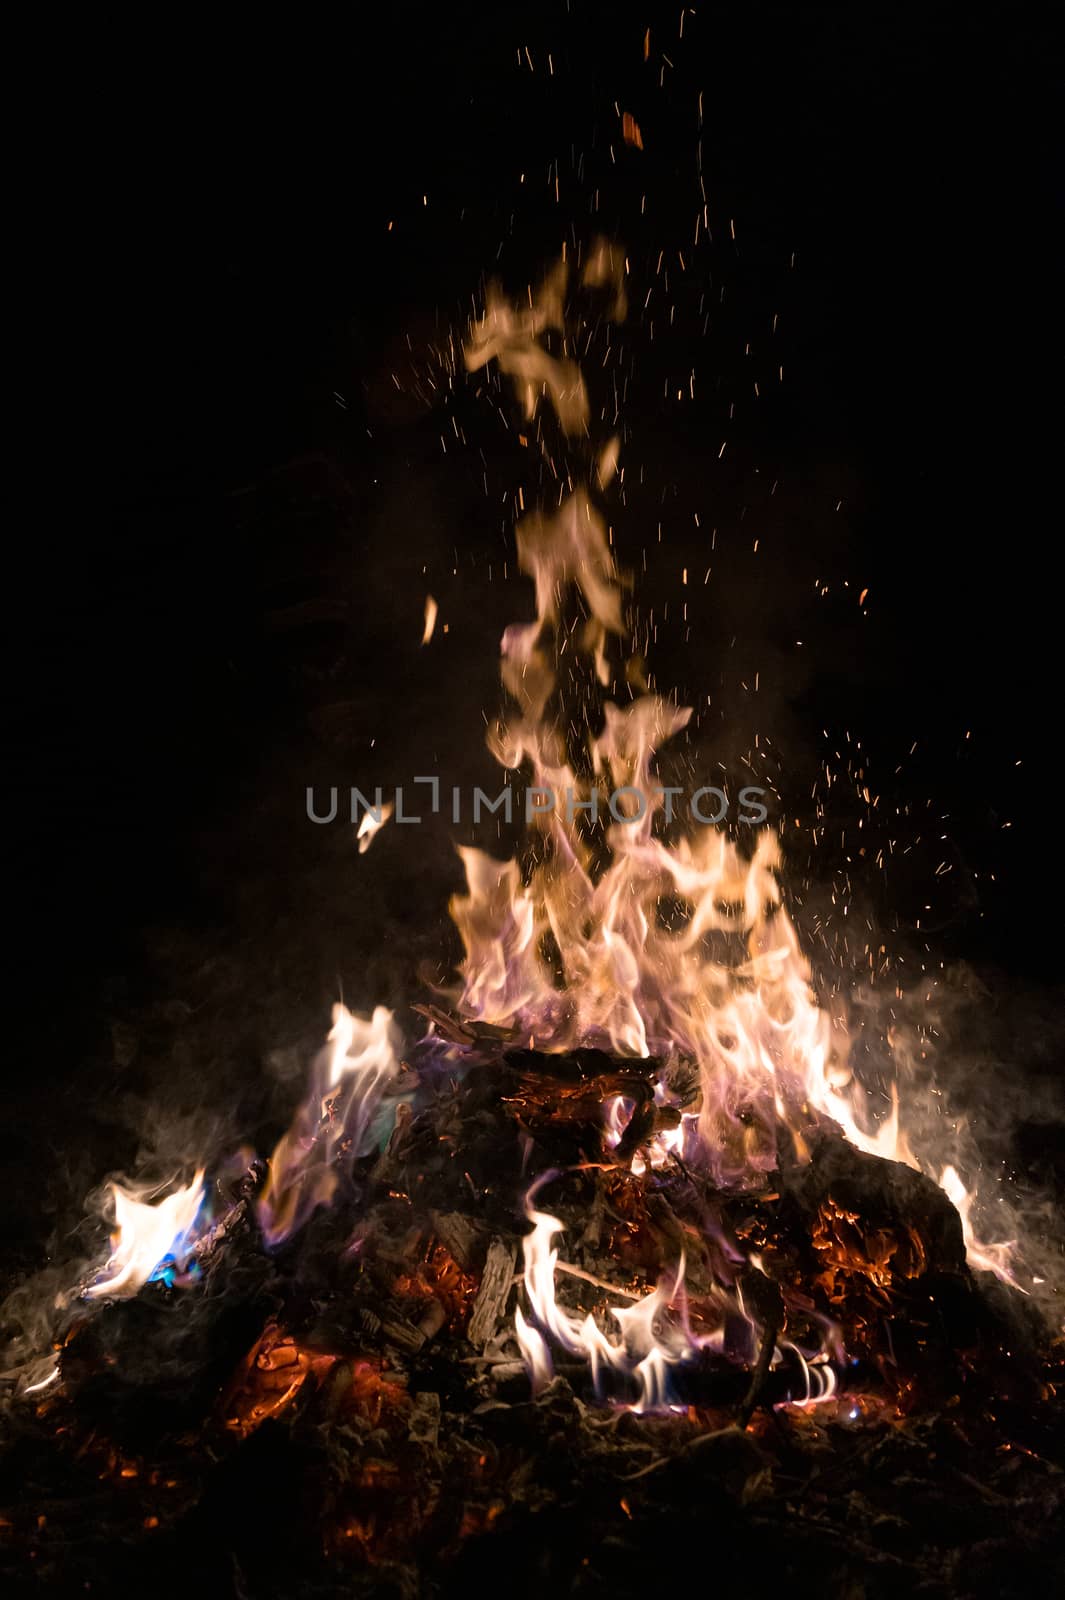 A low light underexposed photo of burning fire. Many sparks and flames. Burning books and wood. 